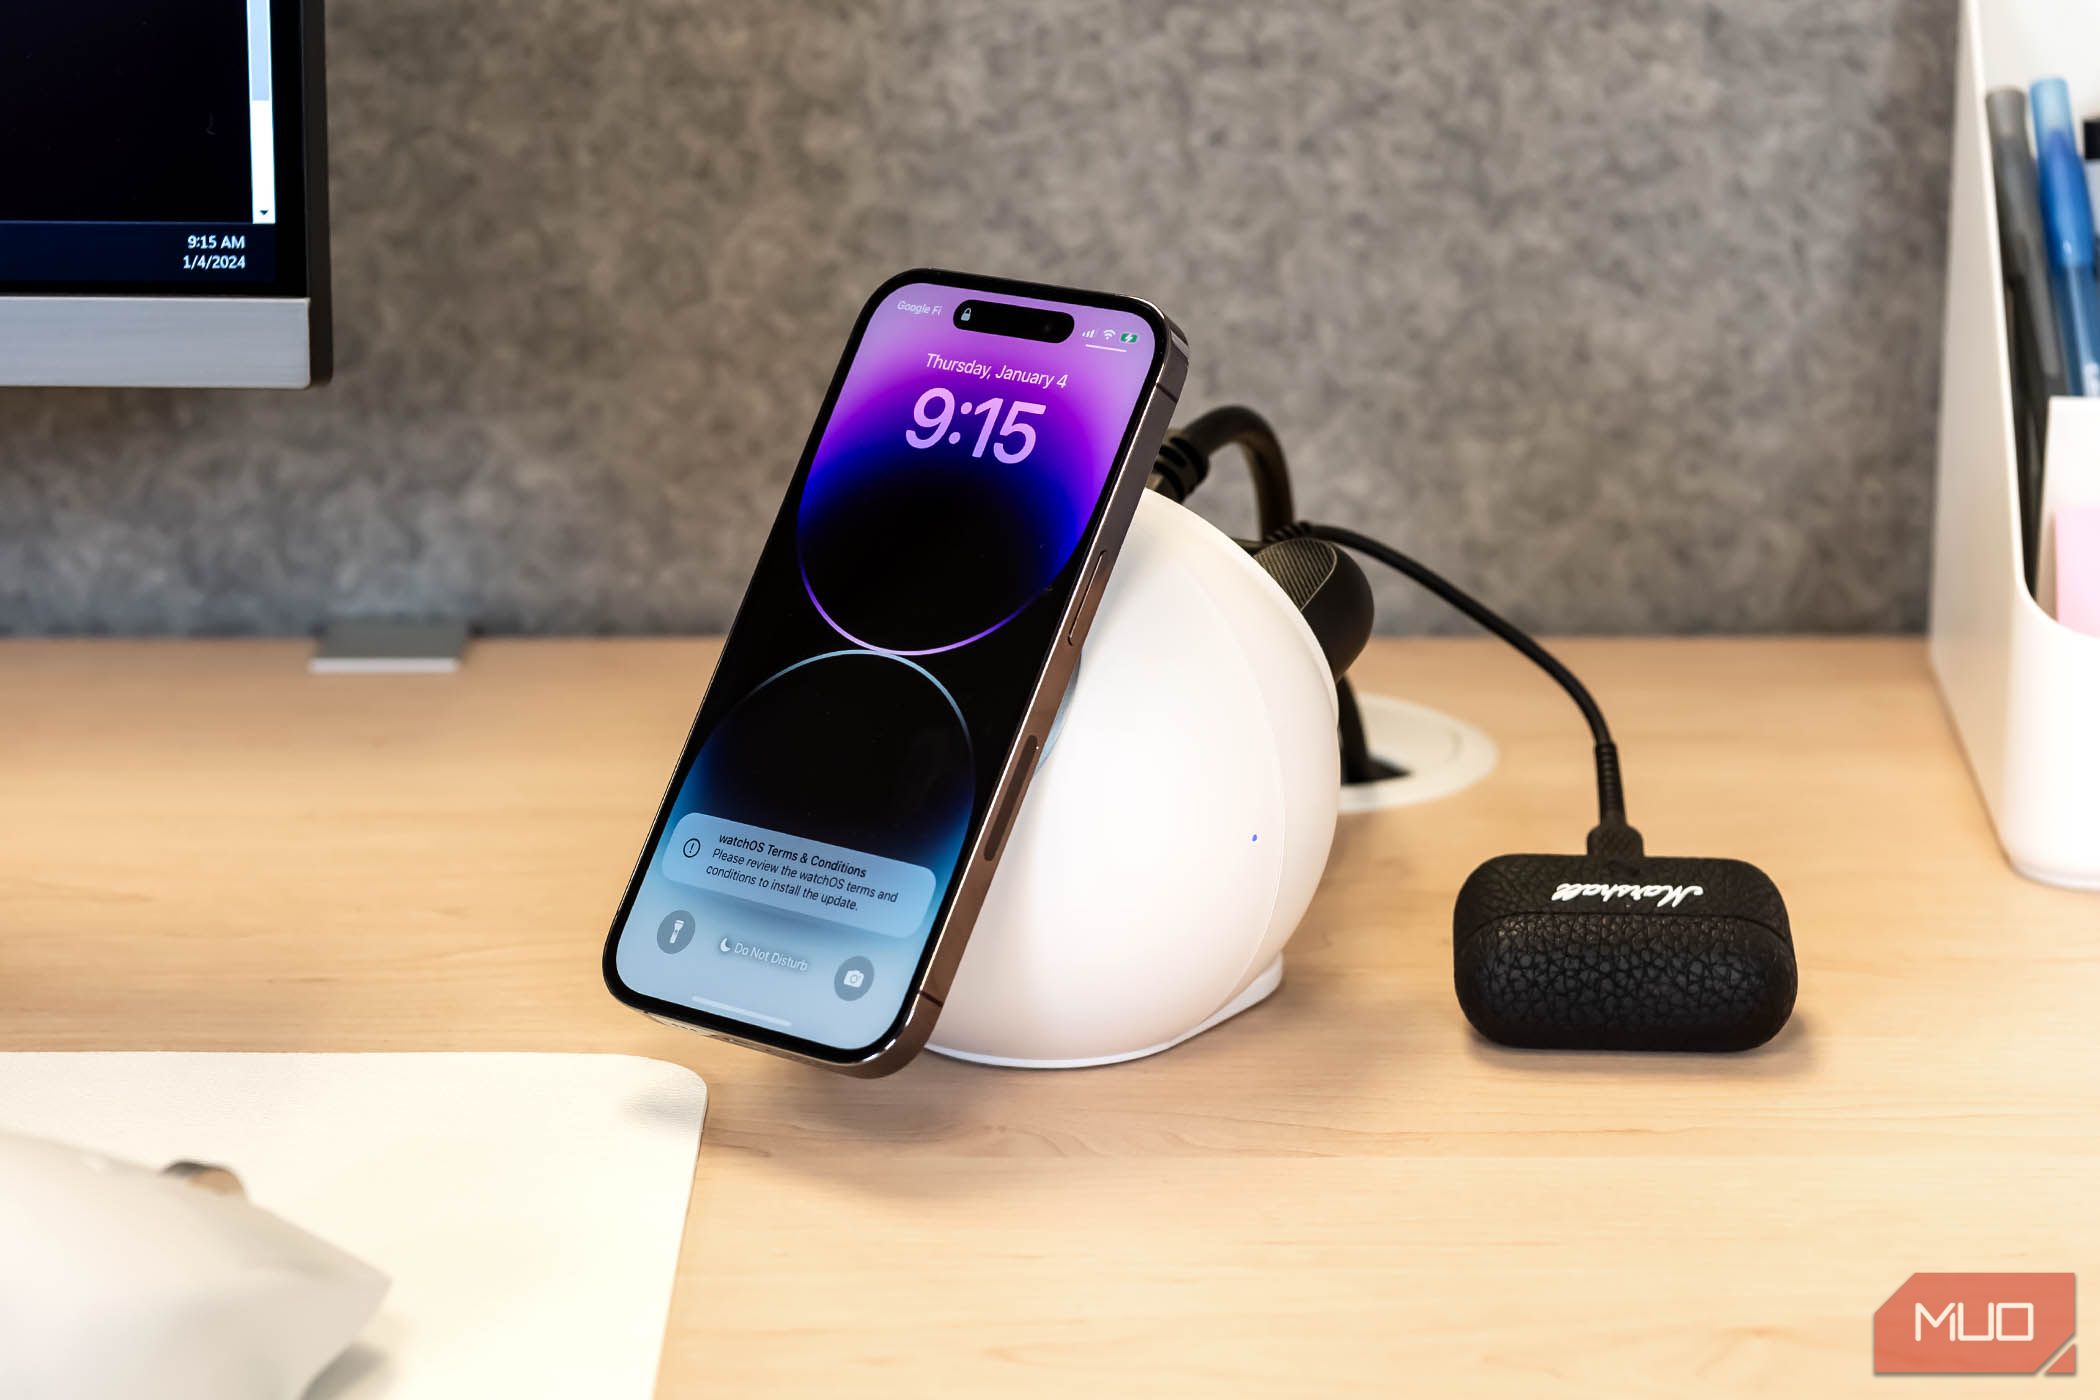 Charging an iPhone on the Anker MagGo Magnetic Charging Station 8 in 1